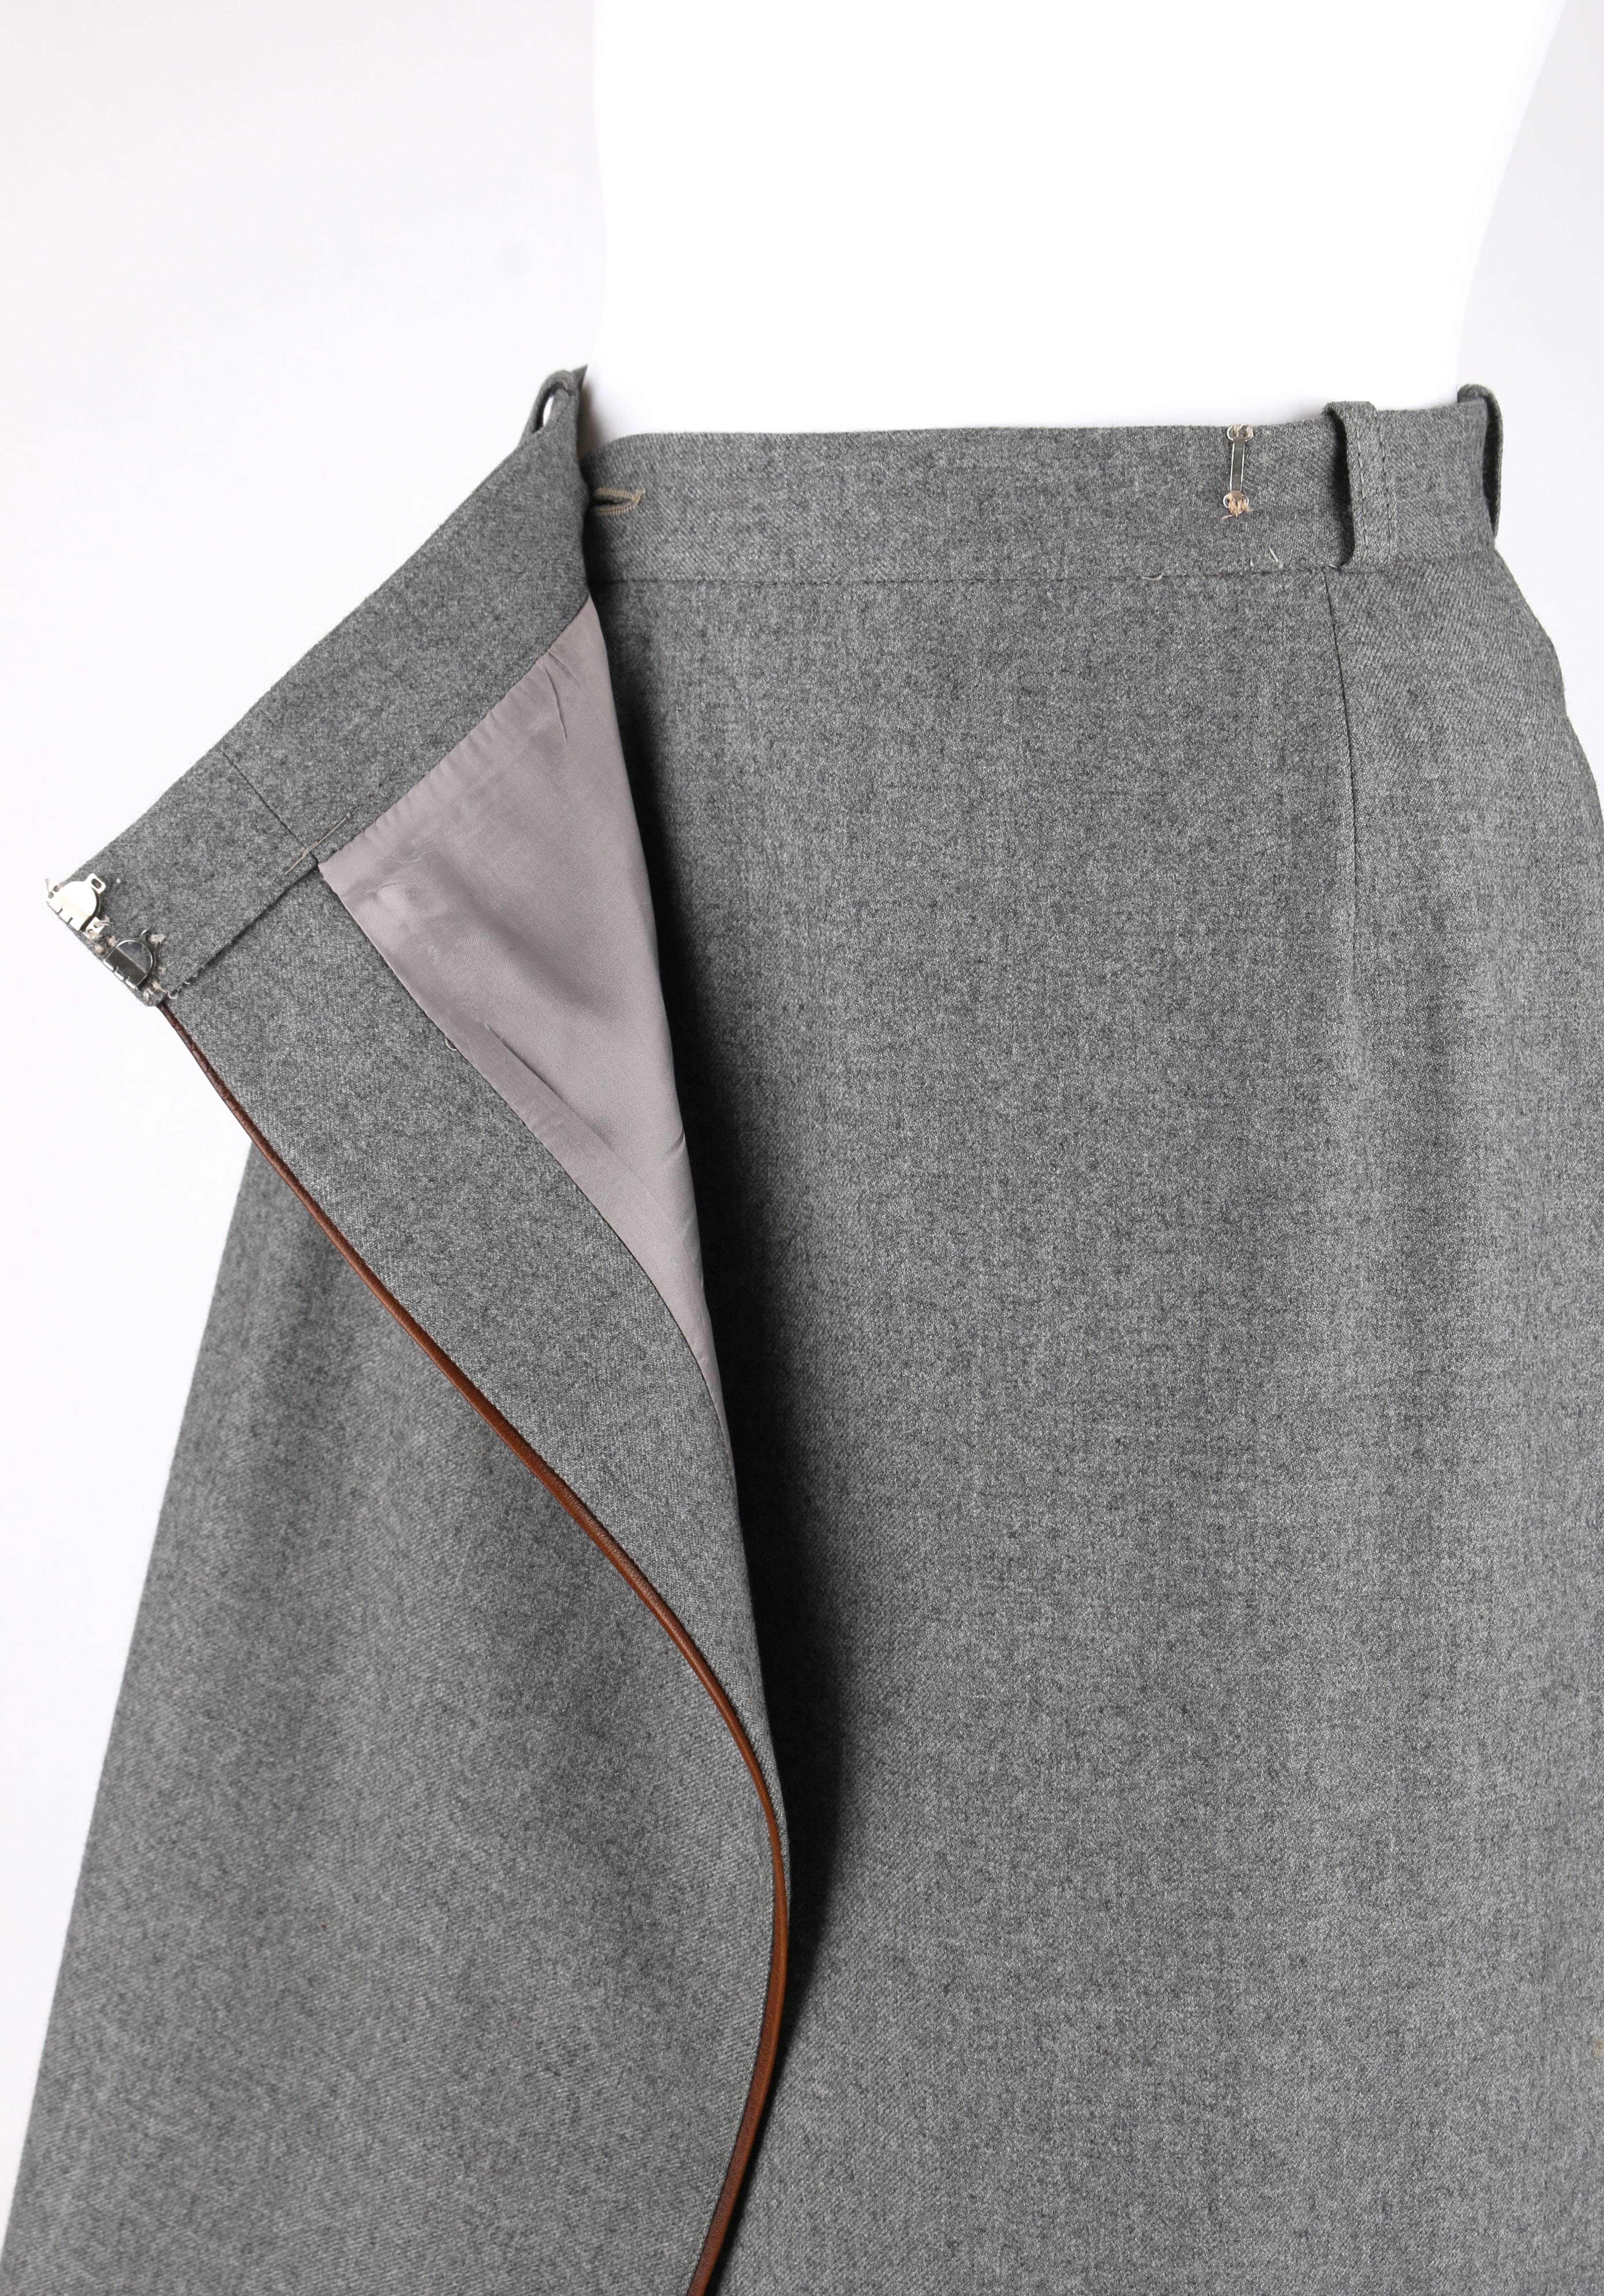 GUCCI c.1970's Gray Wool Classic Wrap Skirt Brown Leather Piping Trim For Sale 3